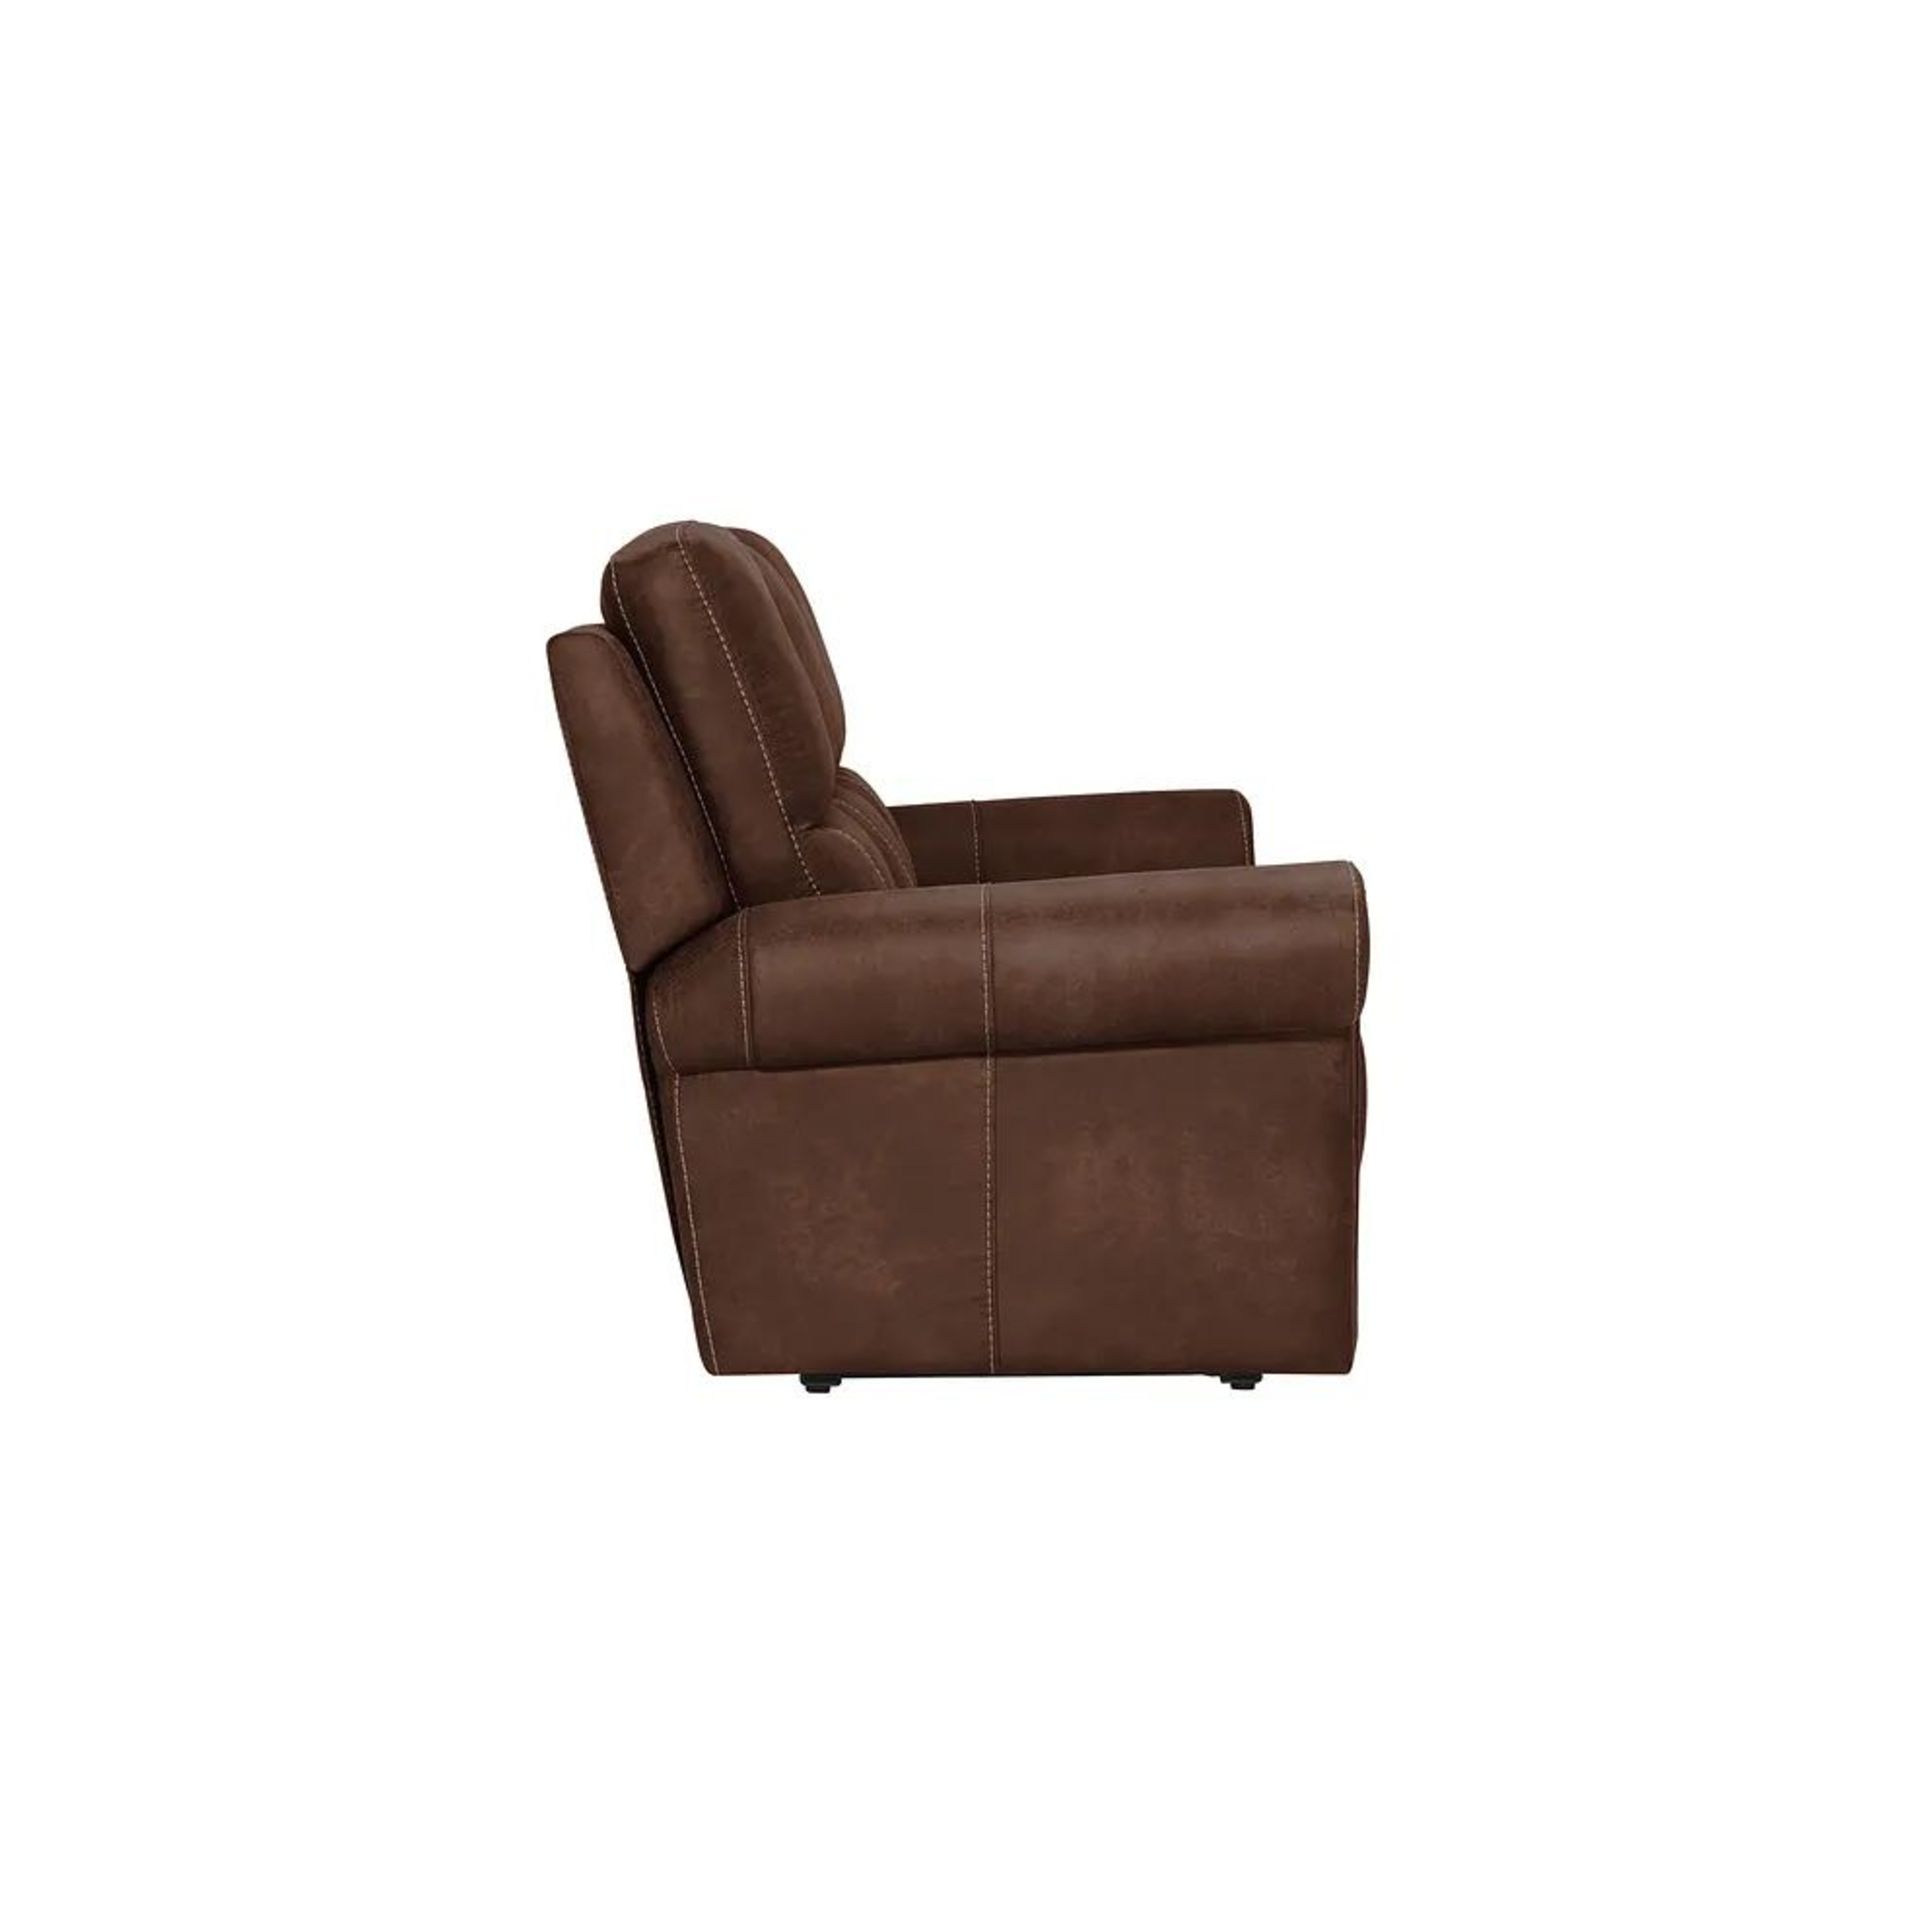 BRAND NEW COLORADO 3 Seater Sofa - DARK BROWN FABRIC. RRP £1099. Shown here in Ranch dark brown, our - Image 3 of 5